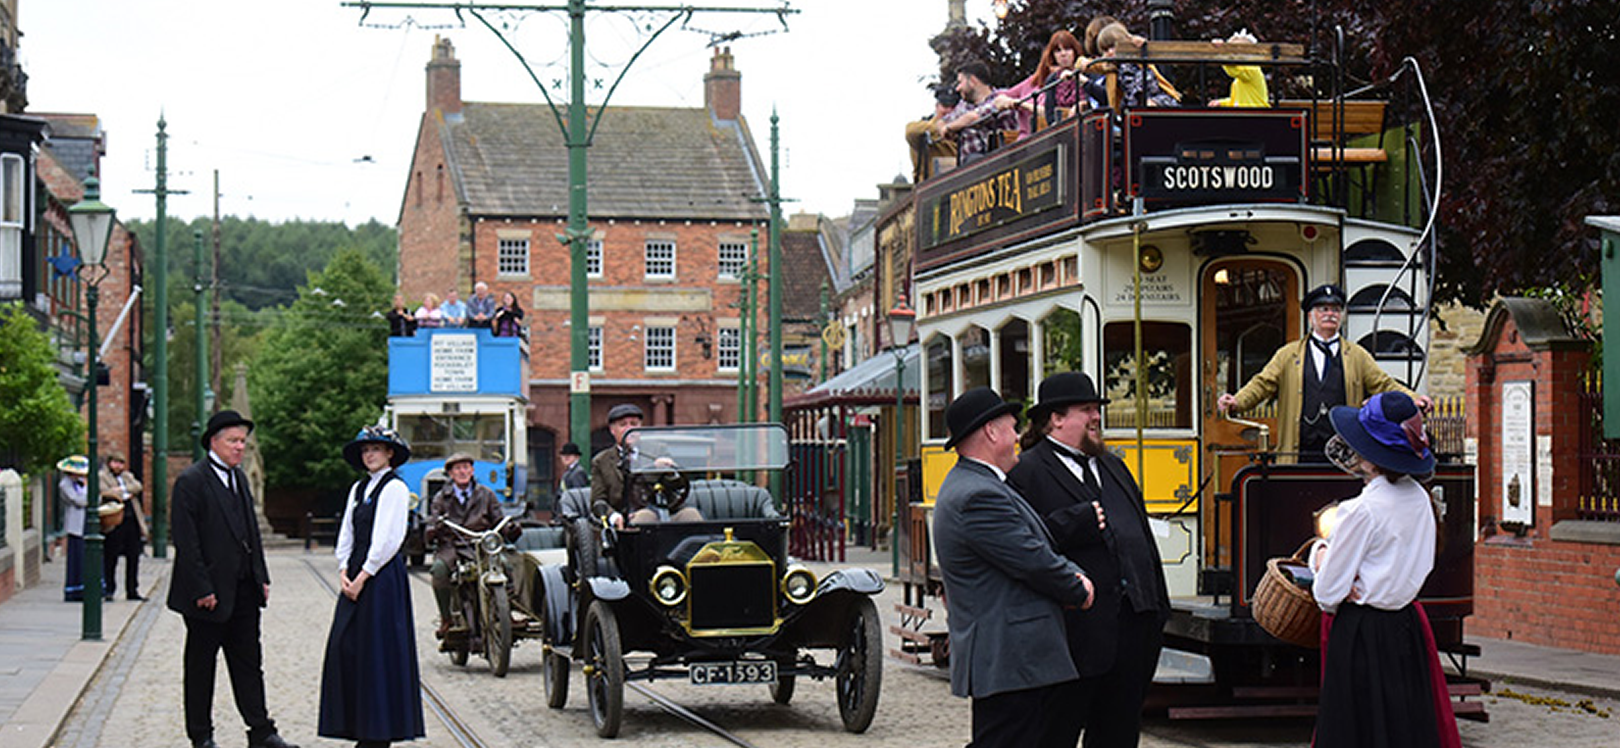 Beamish 1900s Town. People stood in the street.